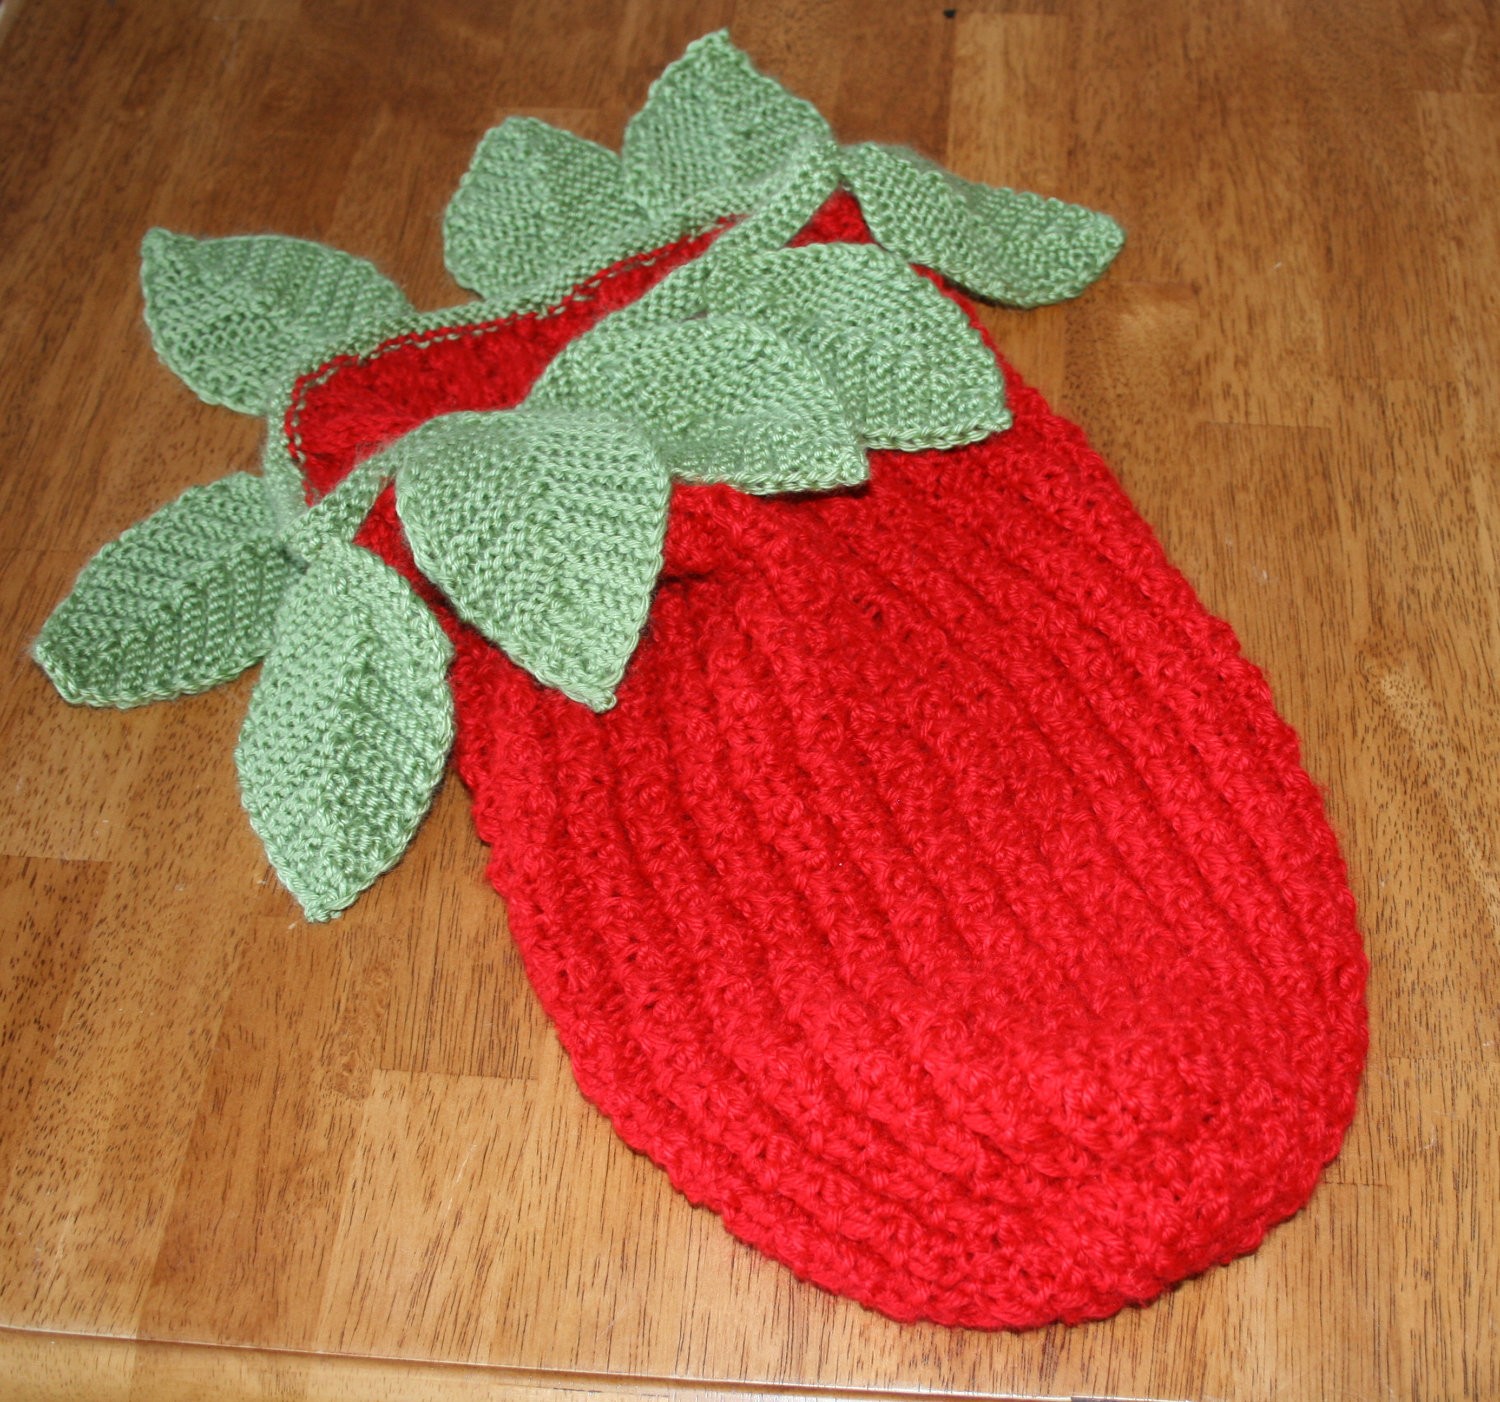 Strawberry Baby Cocoon Knitting Pattern